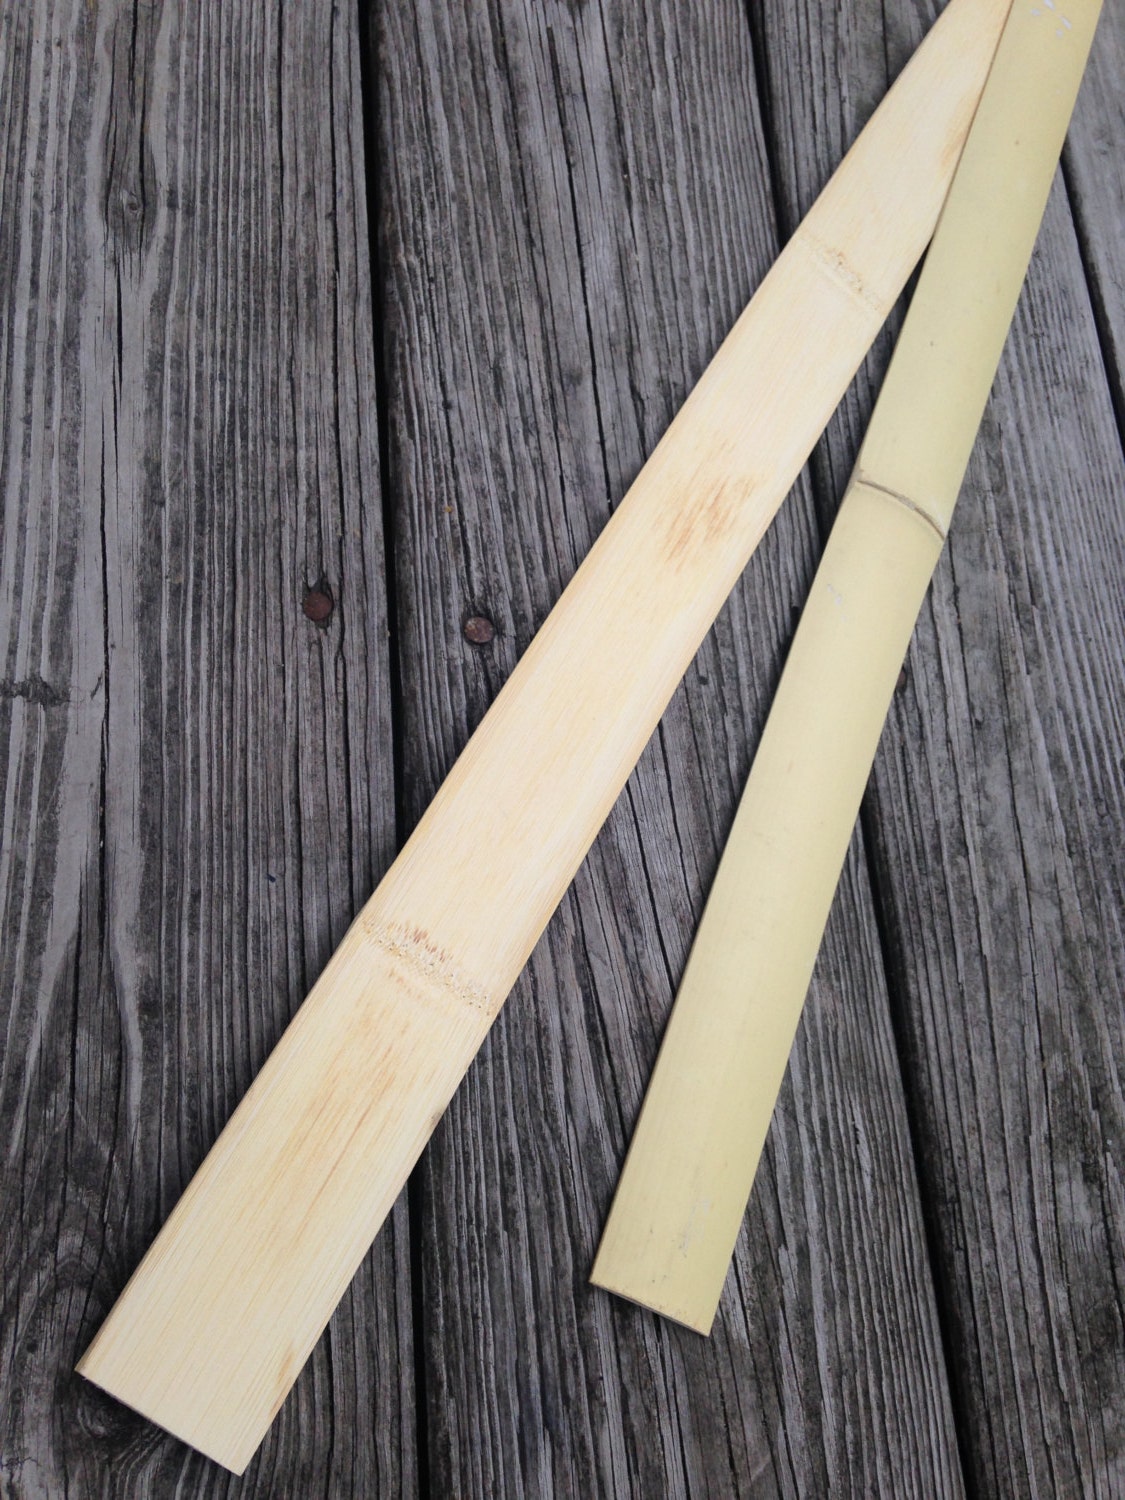 Bow Builders !! Need help with some Thin, tapered, wood strips